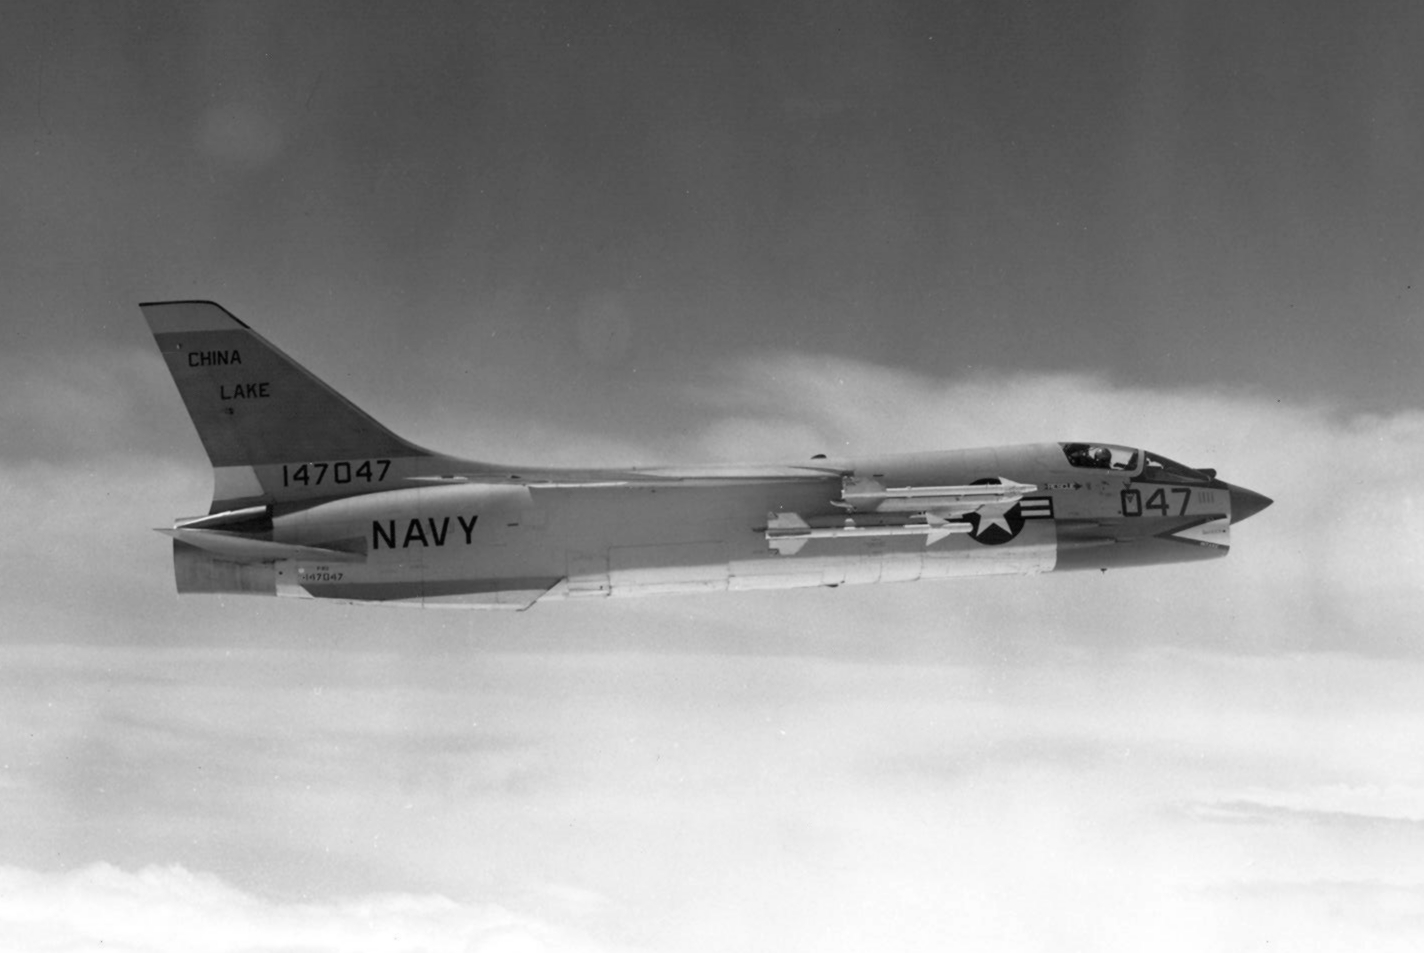 F-8D_with_AIM-9C_missiles_over_China_Lake_1963.jpeg